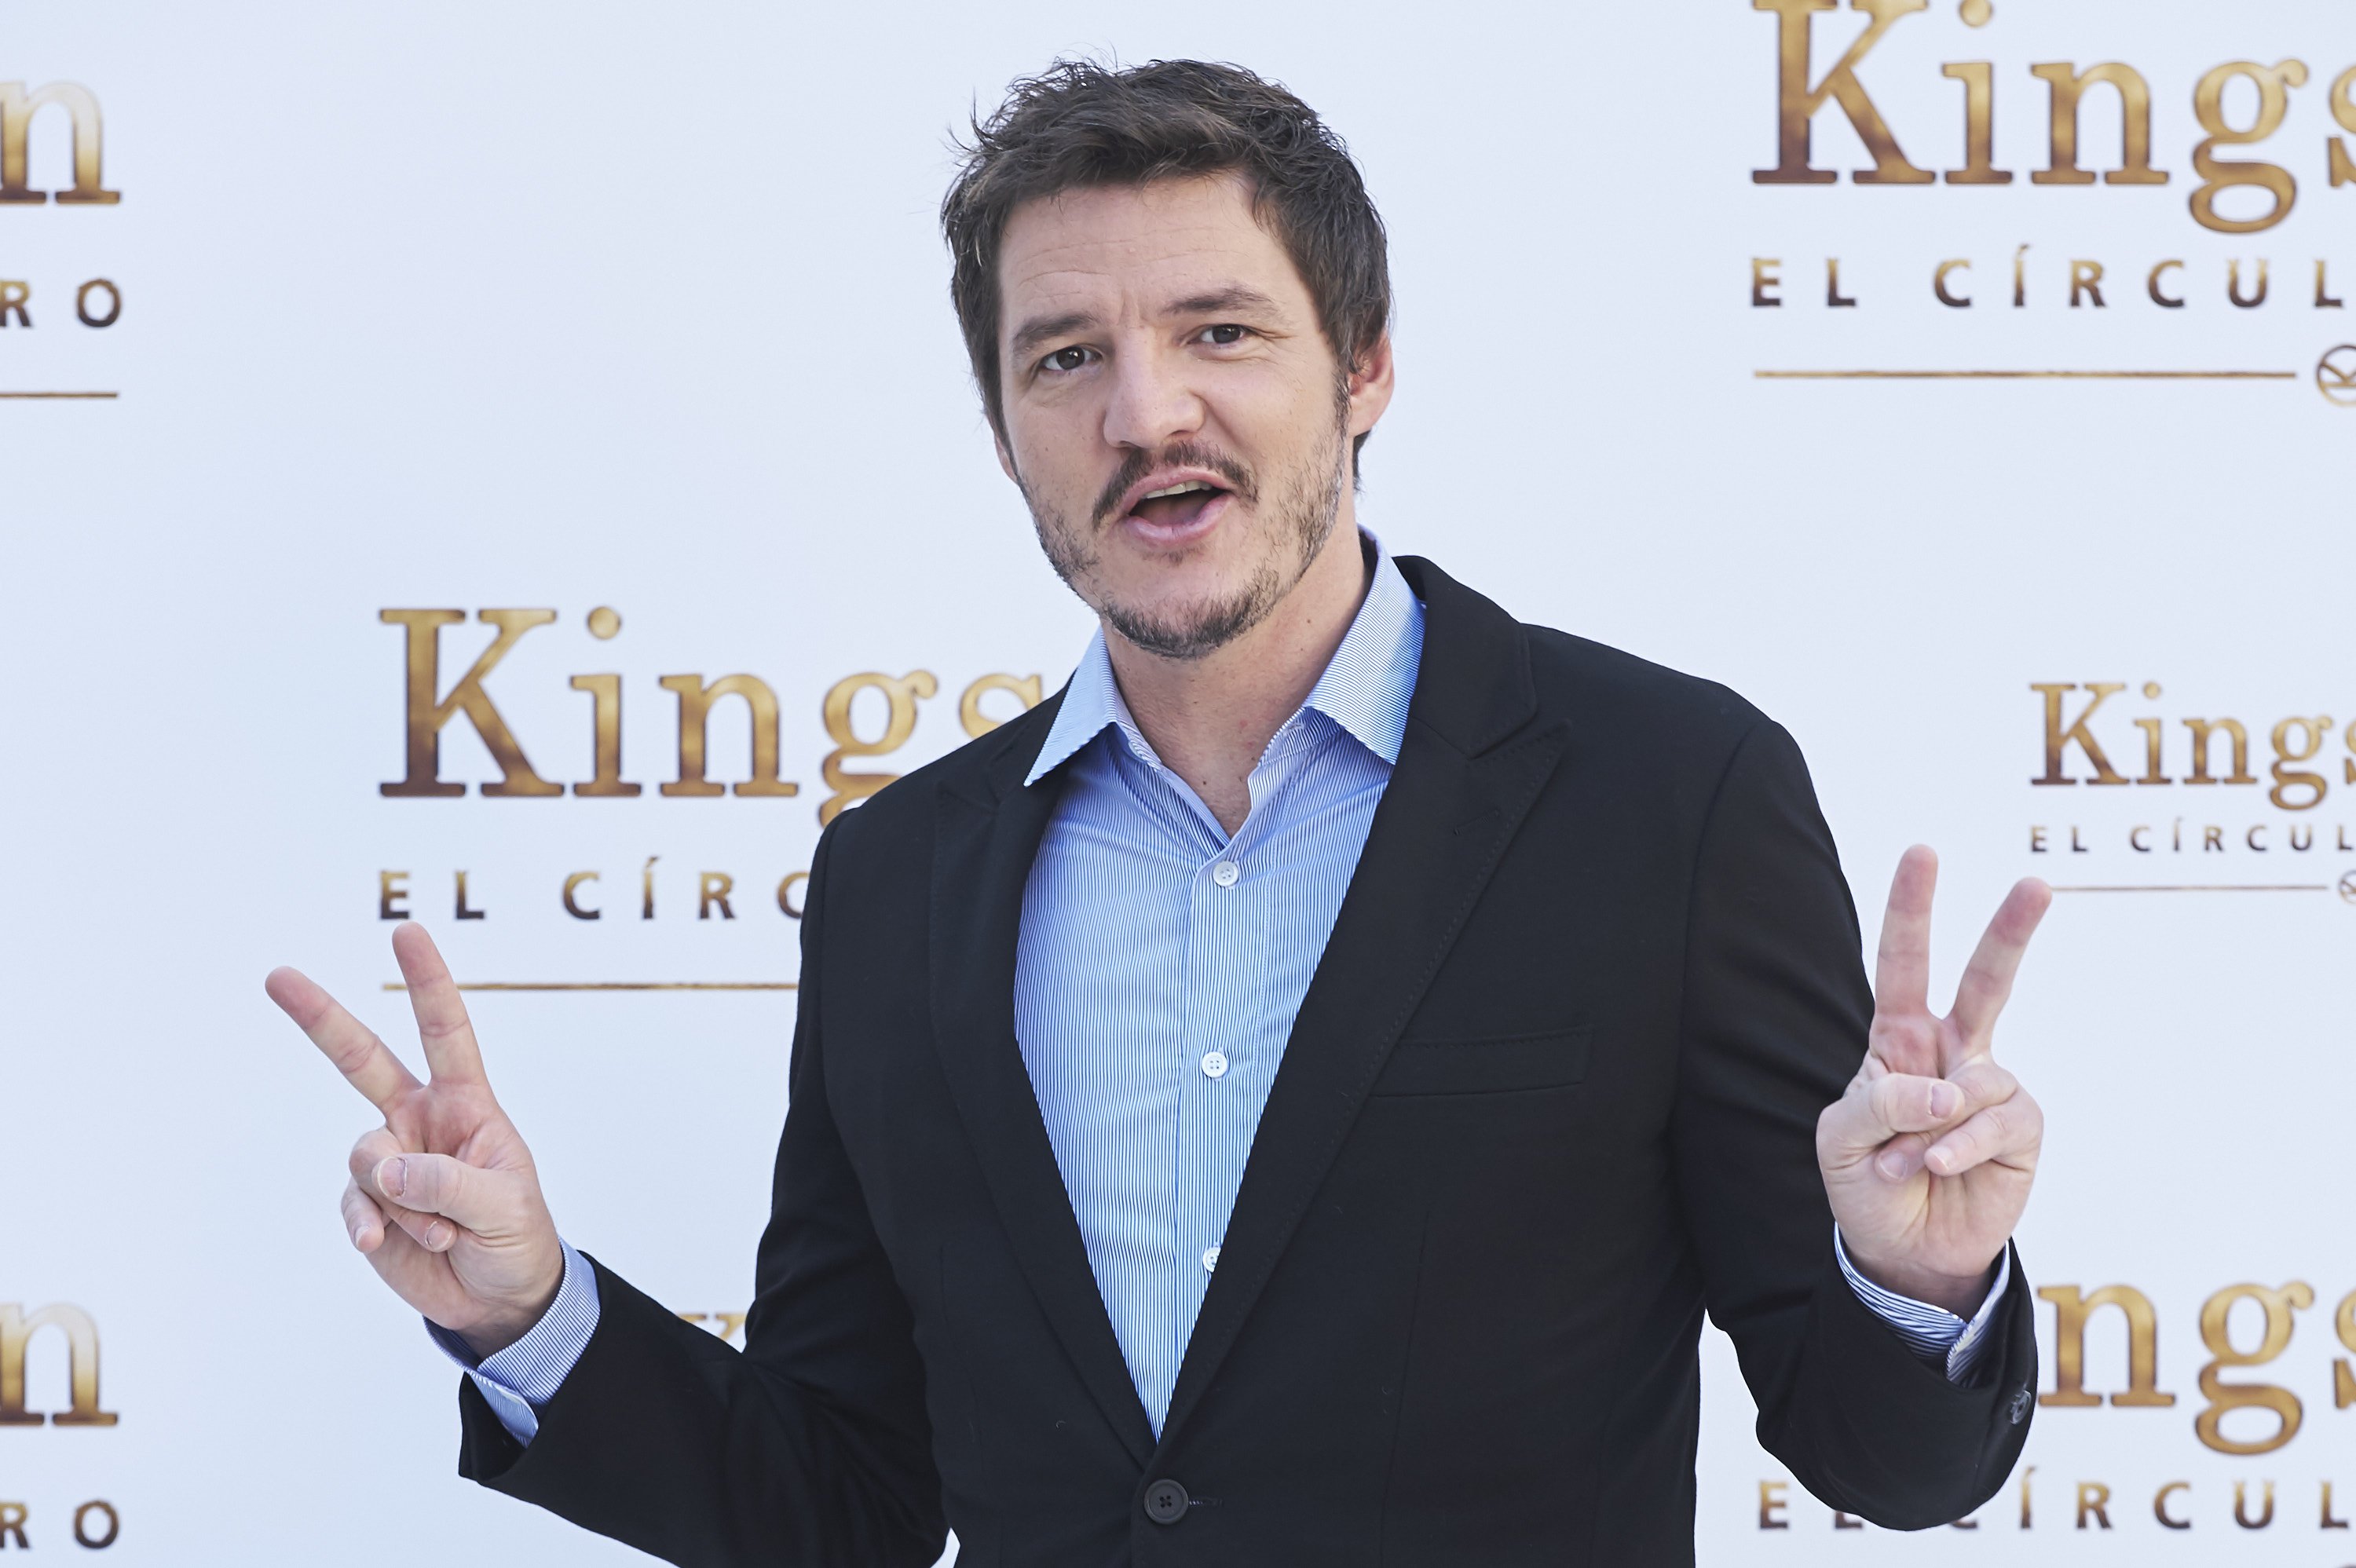 Pedro Pascal attends 'Kingsman: El Circulo De Oro' photocall at the Palacio de los Duques Hotel on September 20, 2017 in Madrid, Spain | Photo: Getty Images